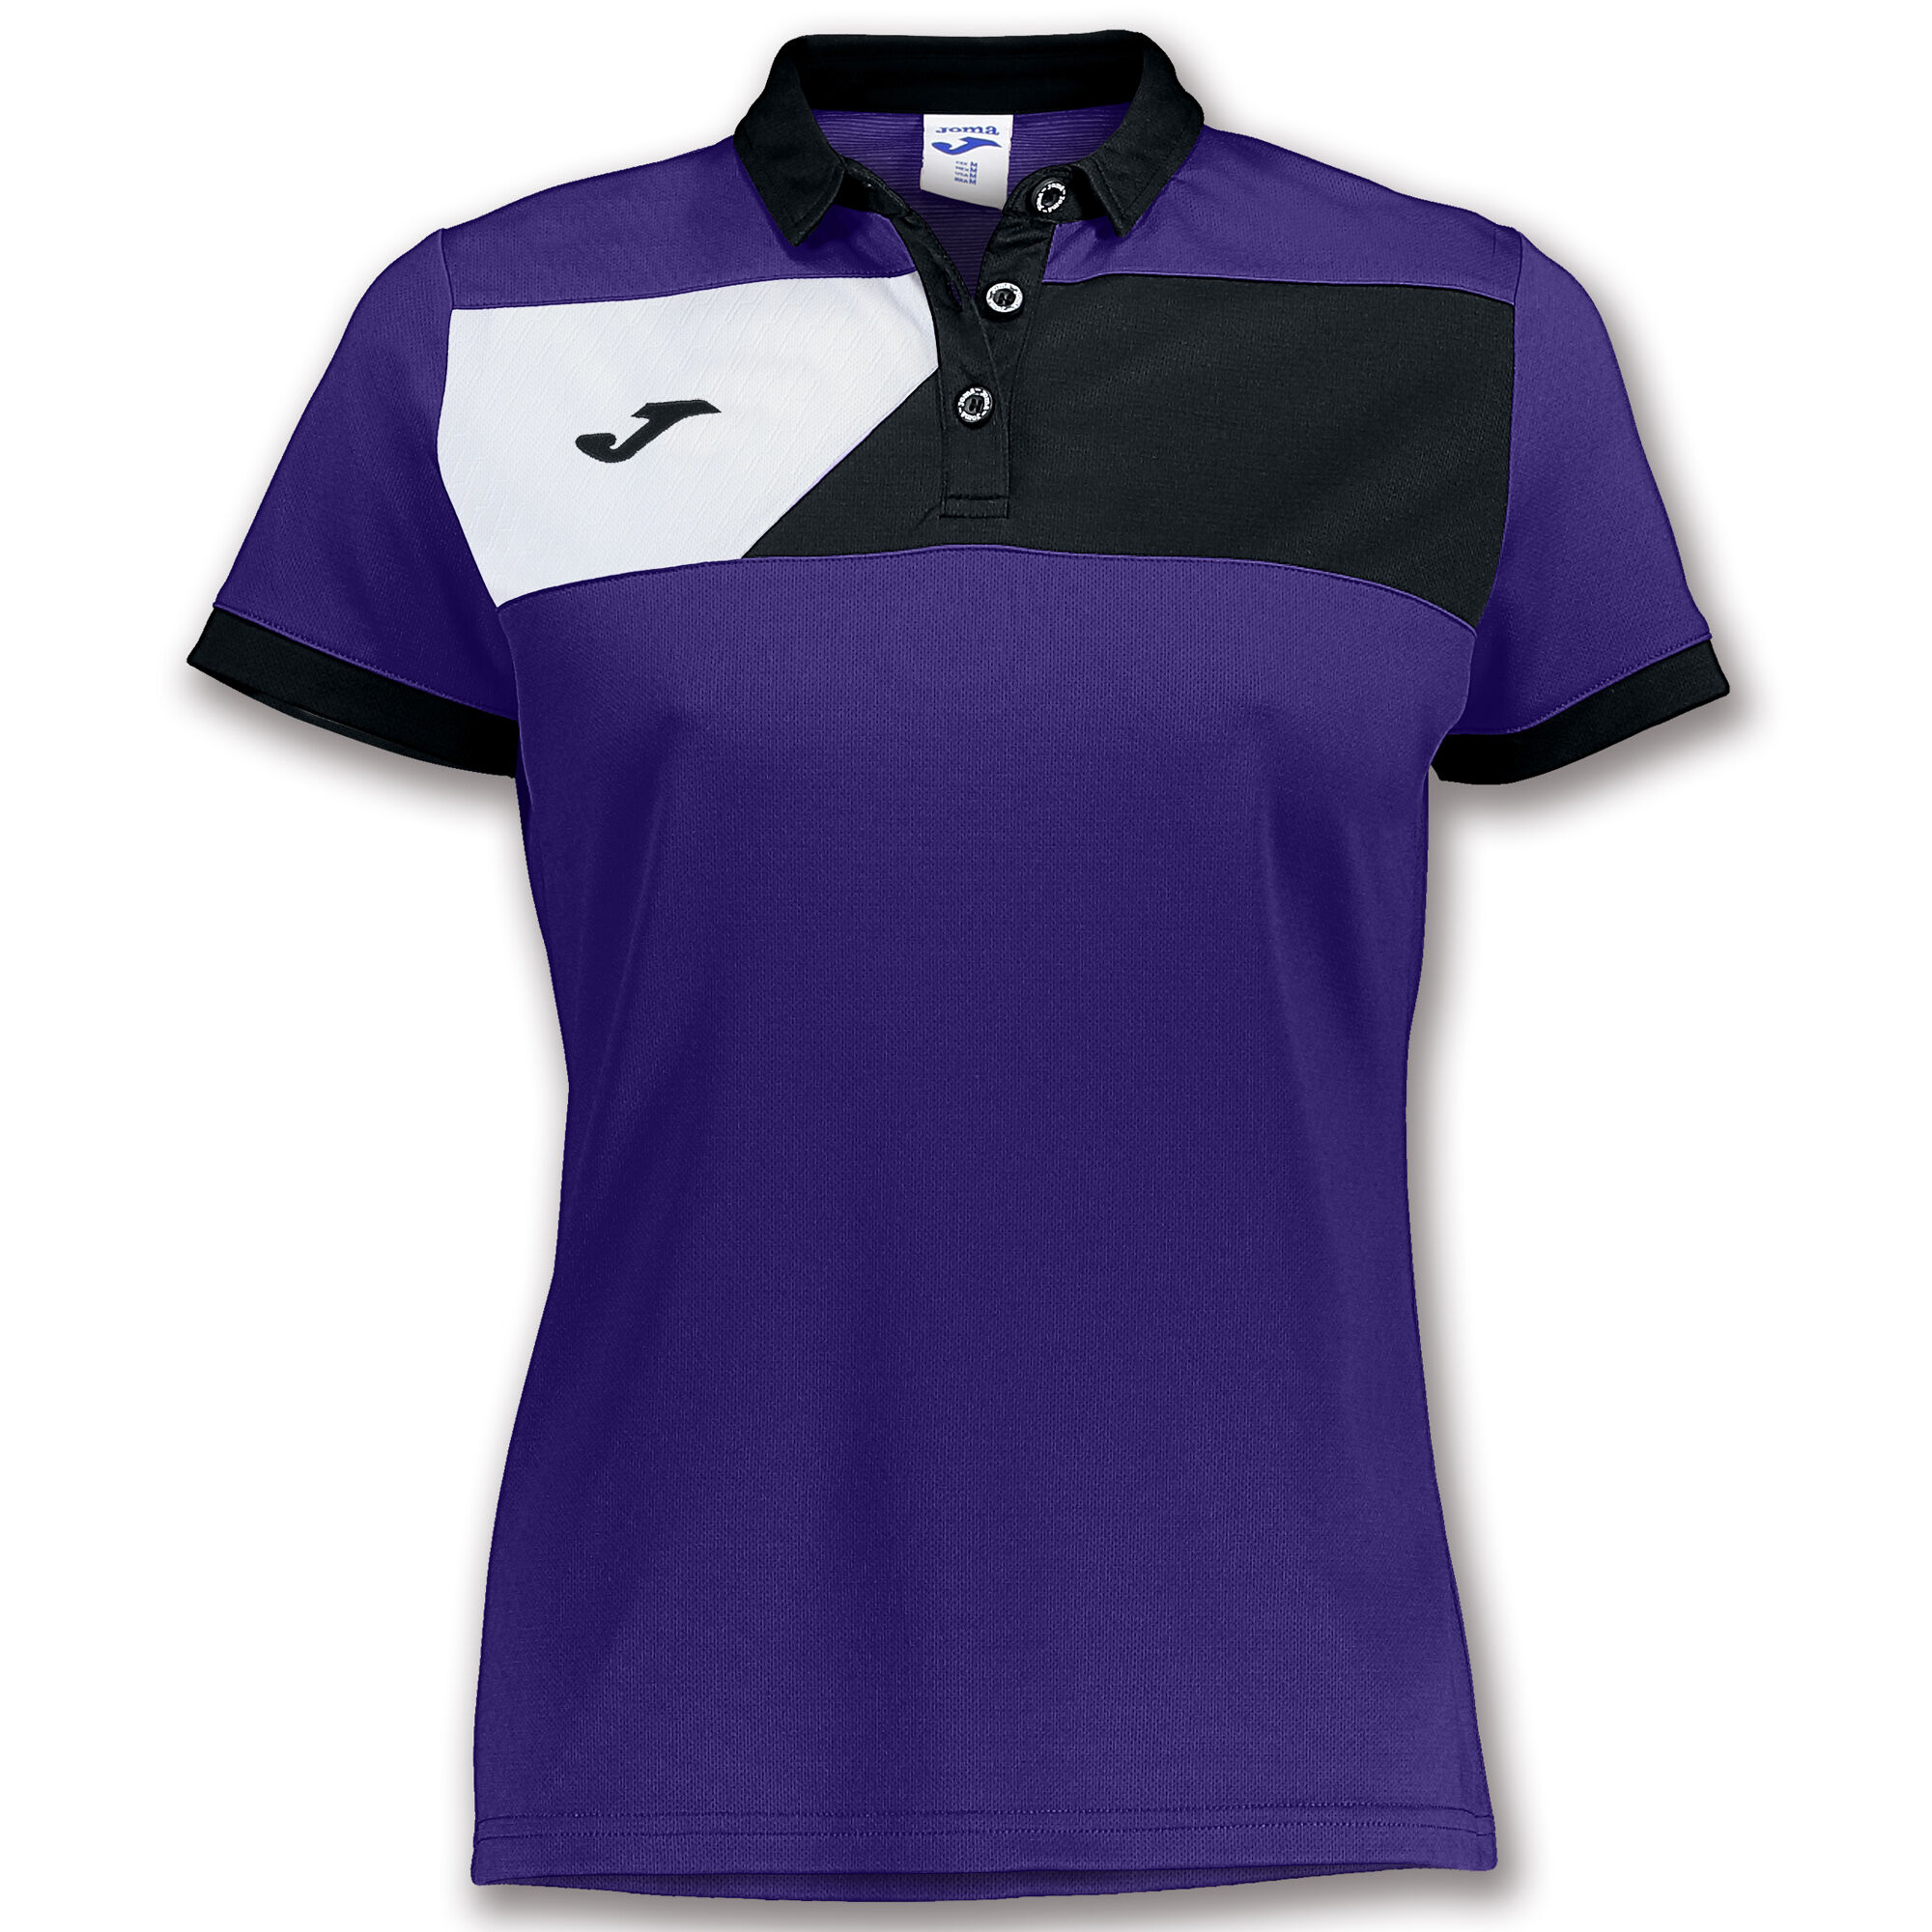 POLO MANCHES COURTES FEMME CREW II VIOLET